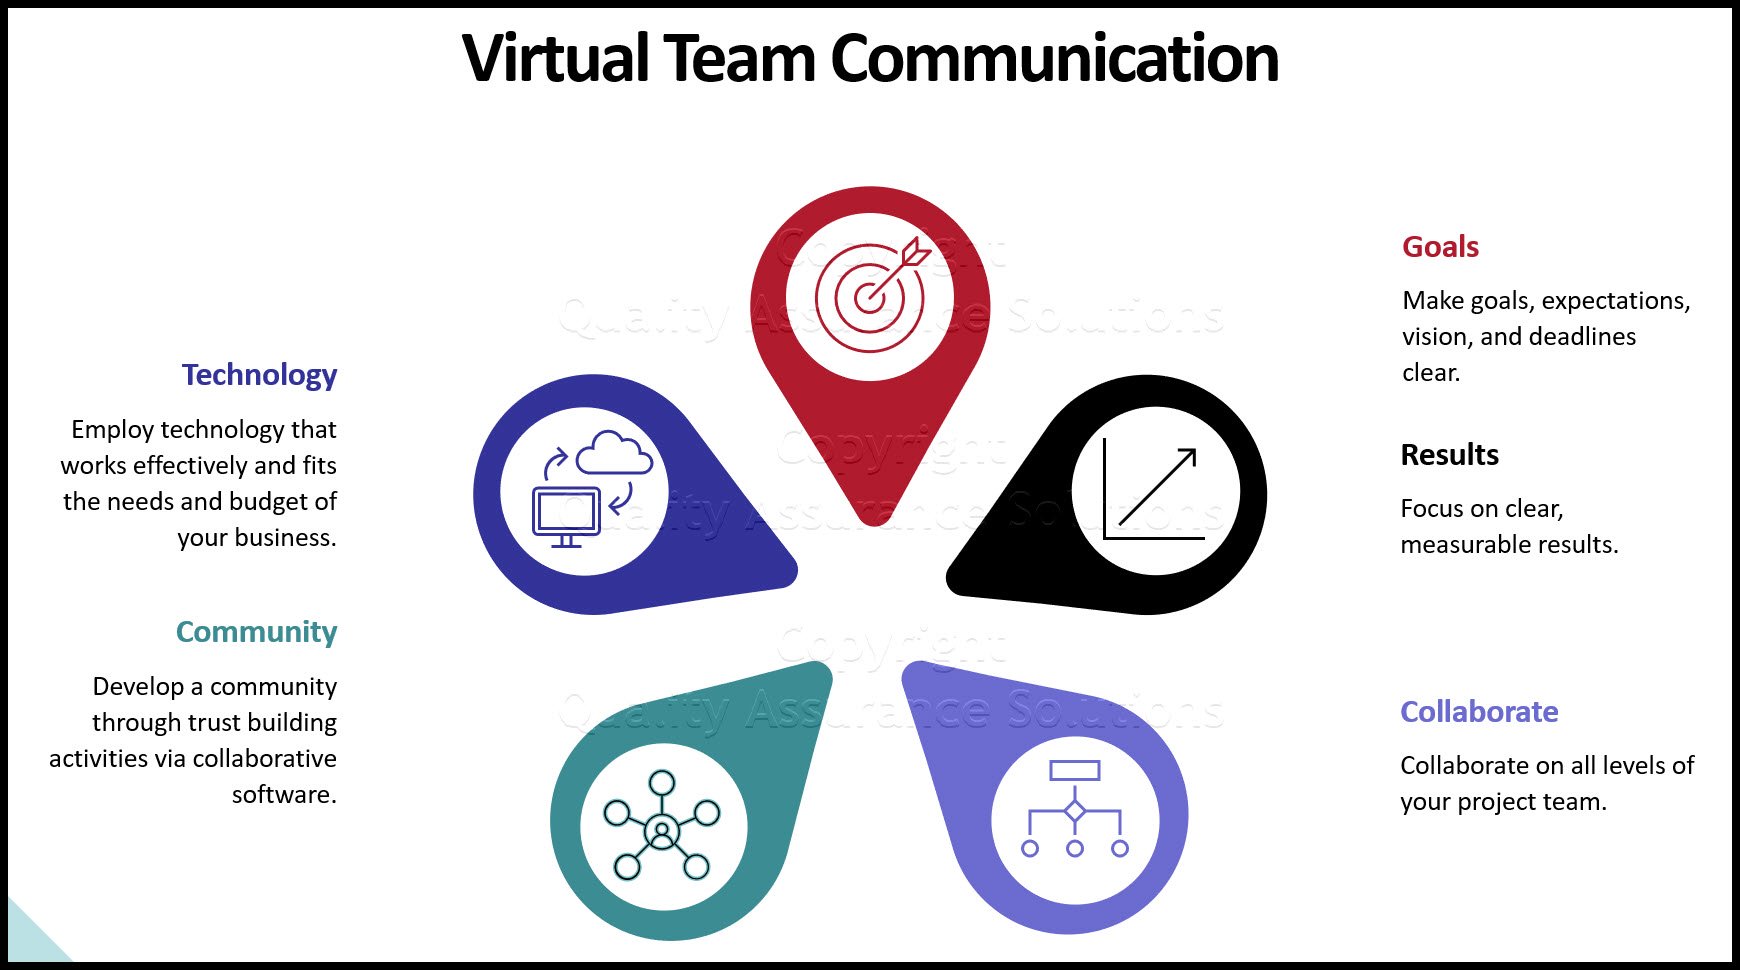 Virtual Team Communication is the future of business in the new global economy.